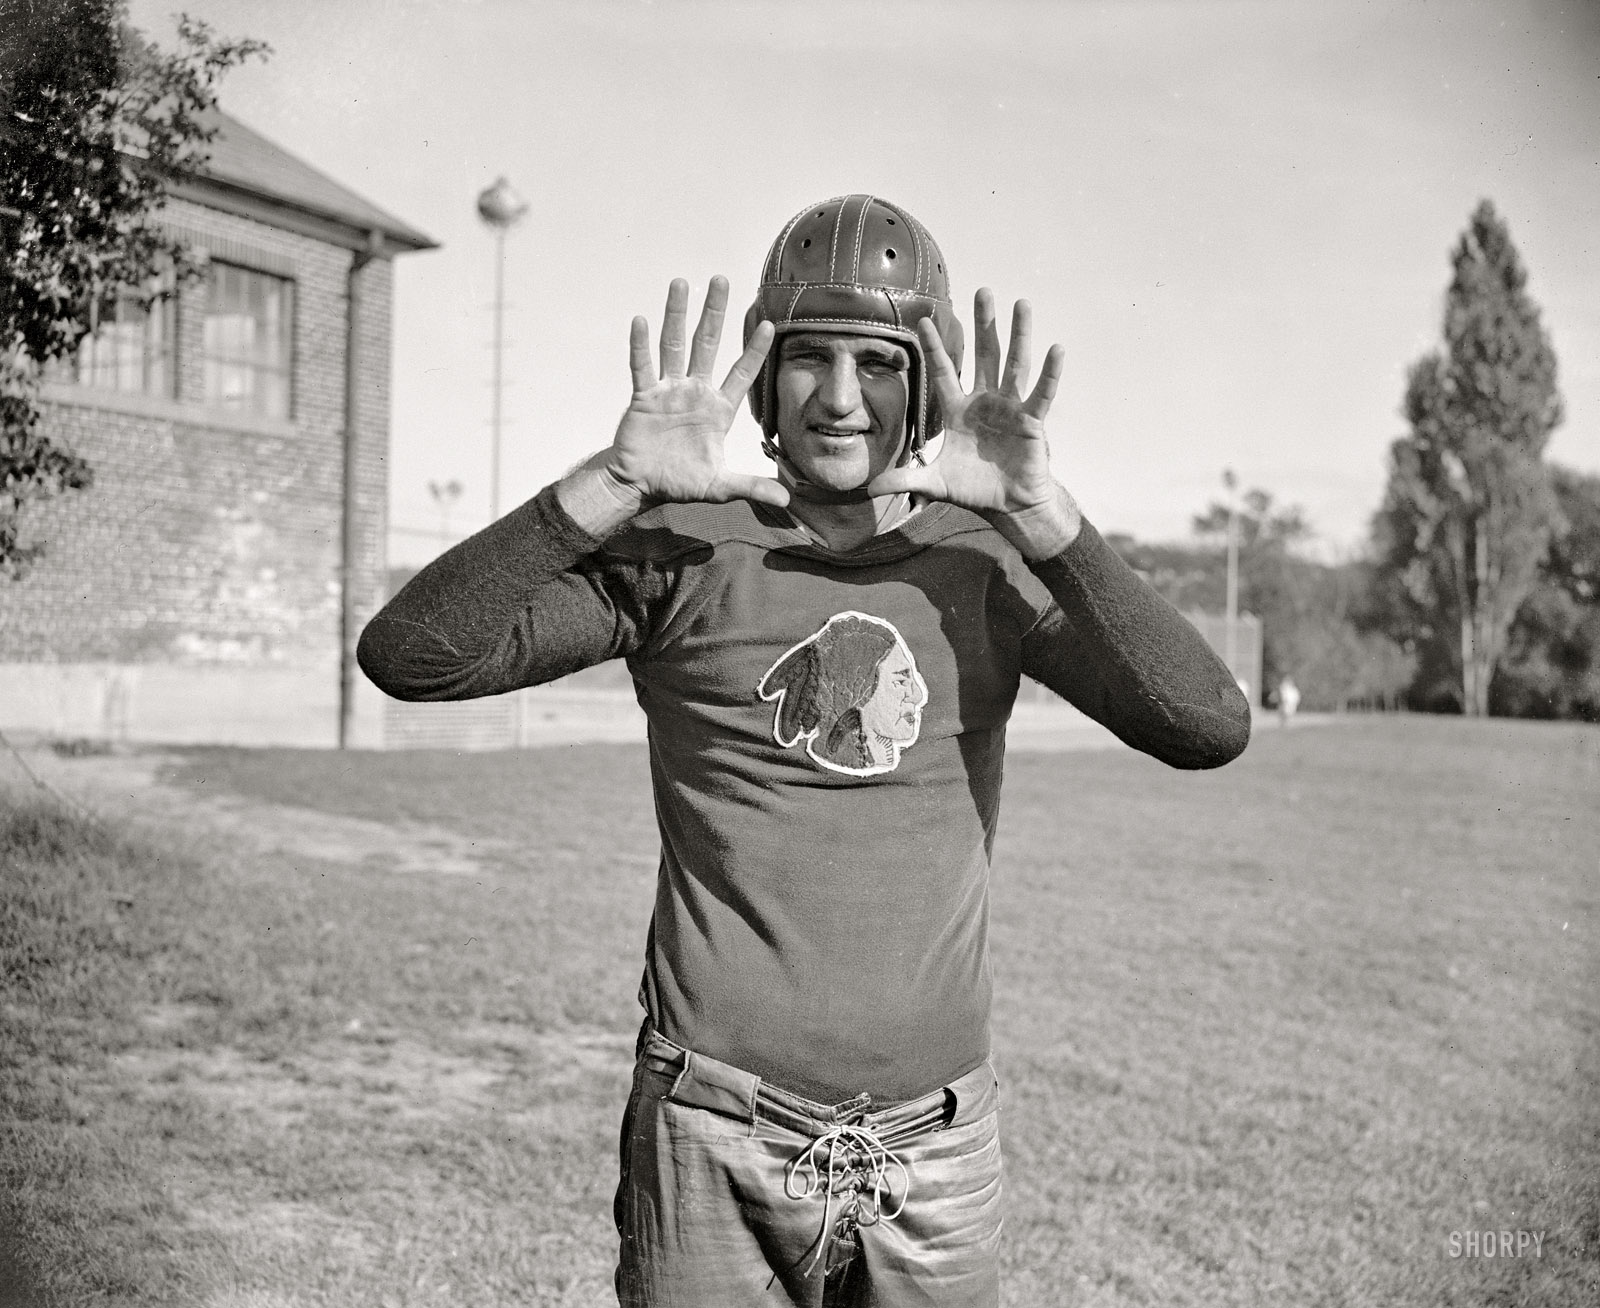 September 11, 1937. "'Slinging Sammy' Baugh, new addition to the Washington Redskins. The Texas Christian U. star is rated as one of the greatest of this generation as far as the passing game goes. Sammy's most recent feat was the practical winning alone of the Green Bay all-stars game at Chicago with a series of sensational passes. He is 24 years old, weighs 190, is six feet tall. Followers of professional football will hear a lot from Sammy this fall." View full size.